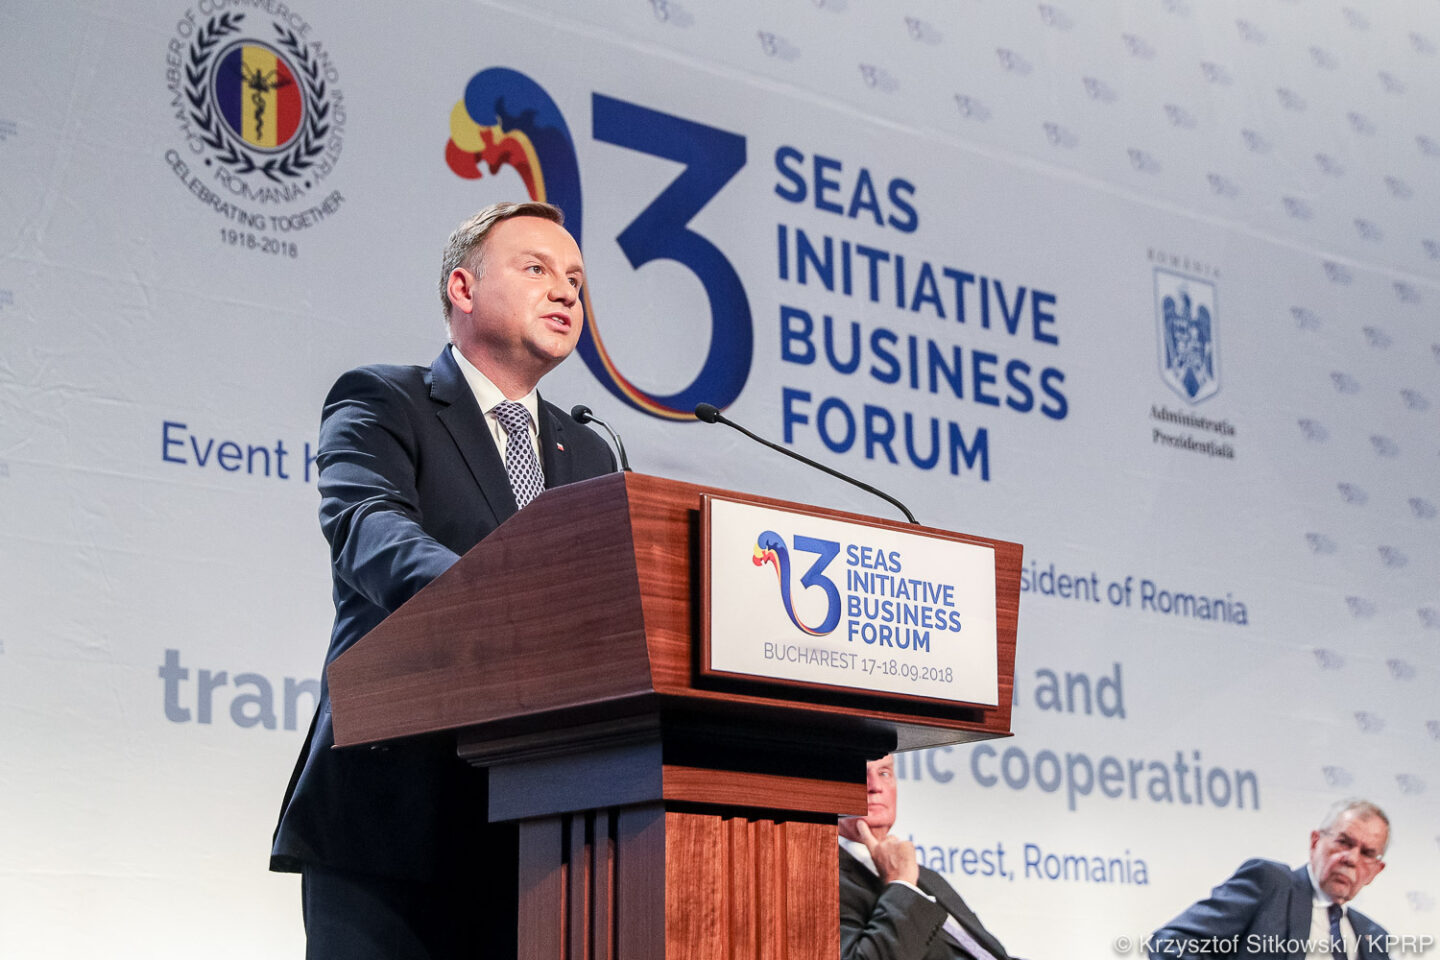 6 years of the Three Seas Initiative. Limited success and untapped potential